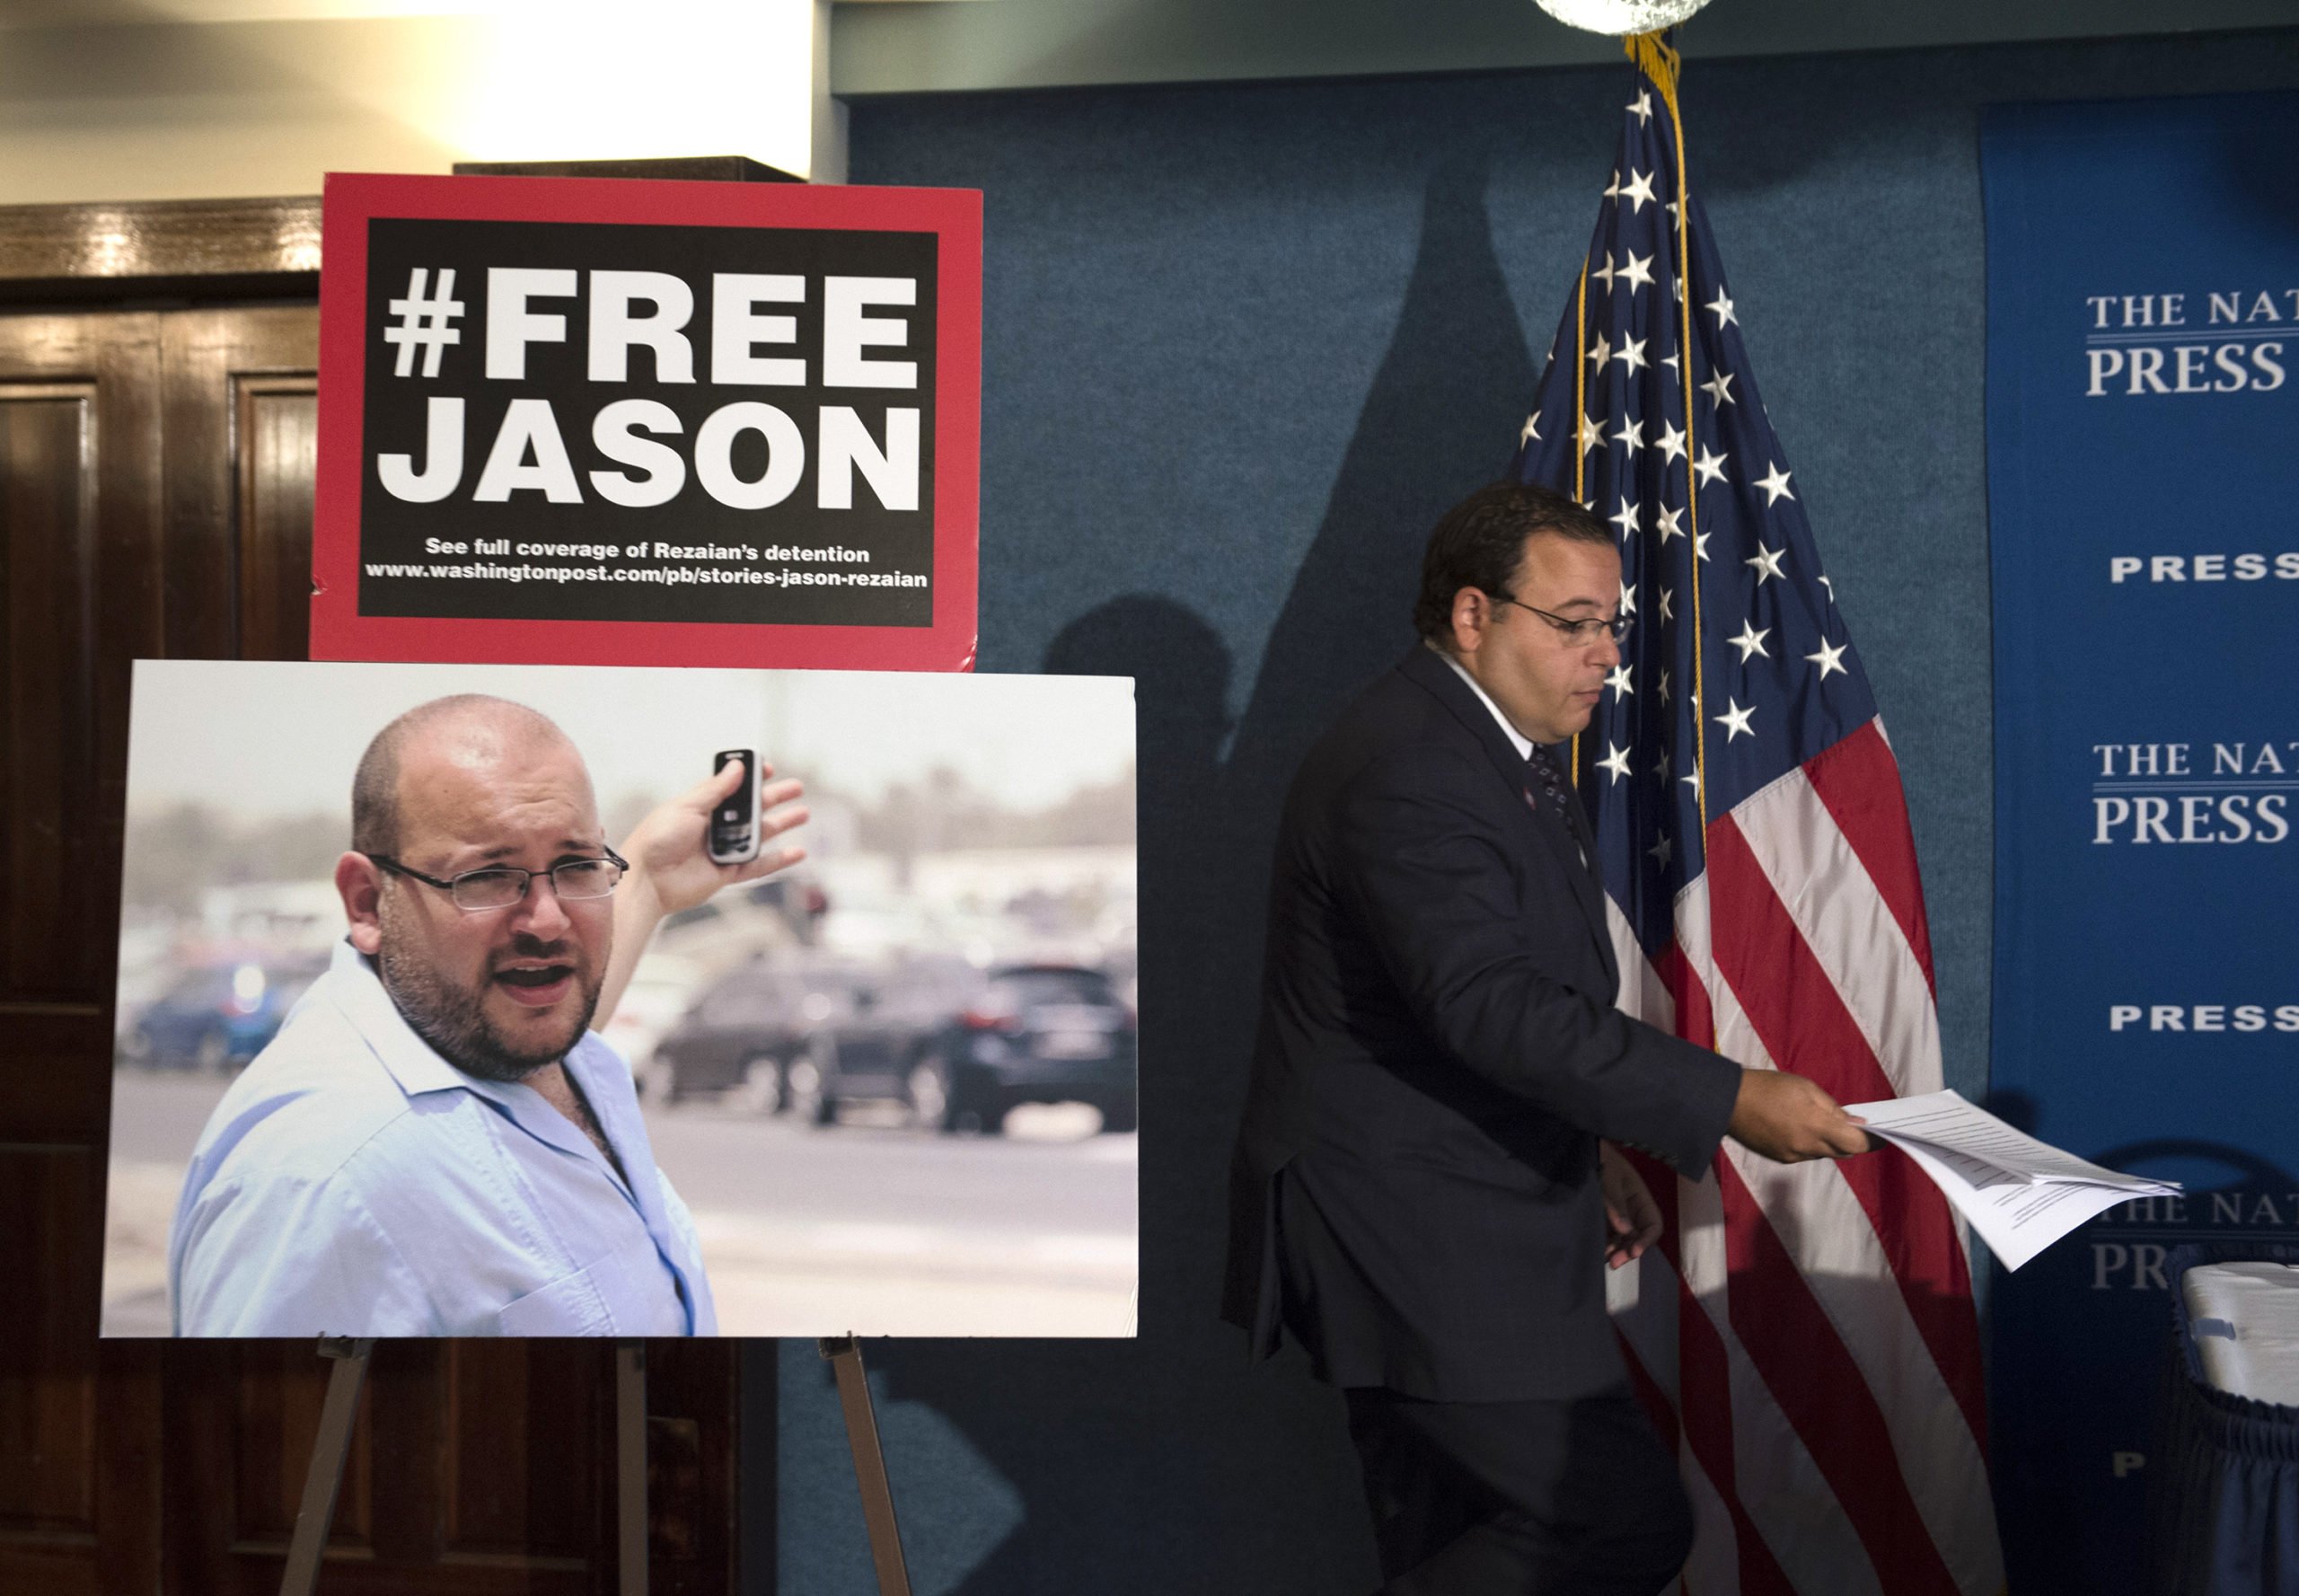 Ali Rezaian, brother of Jason Rezaian, The Washington Post's Tehran Bureau Chief who who was held in Evin Prison in Iran, arrives at a news conference at the National Press Club to give an update on the case